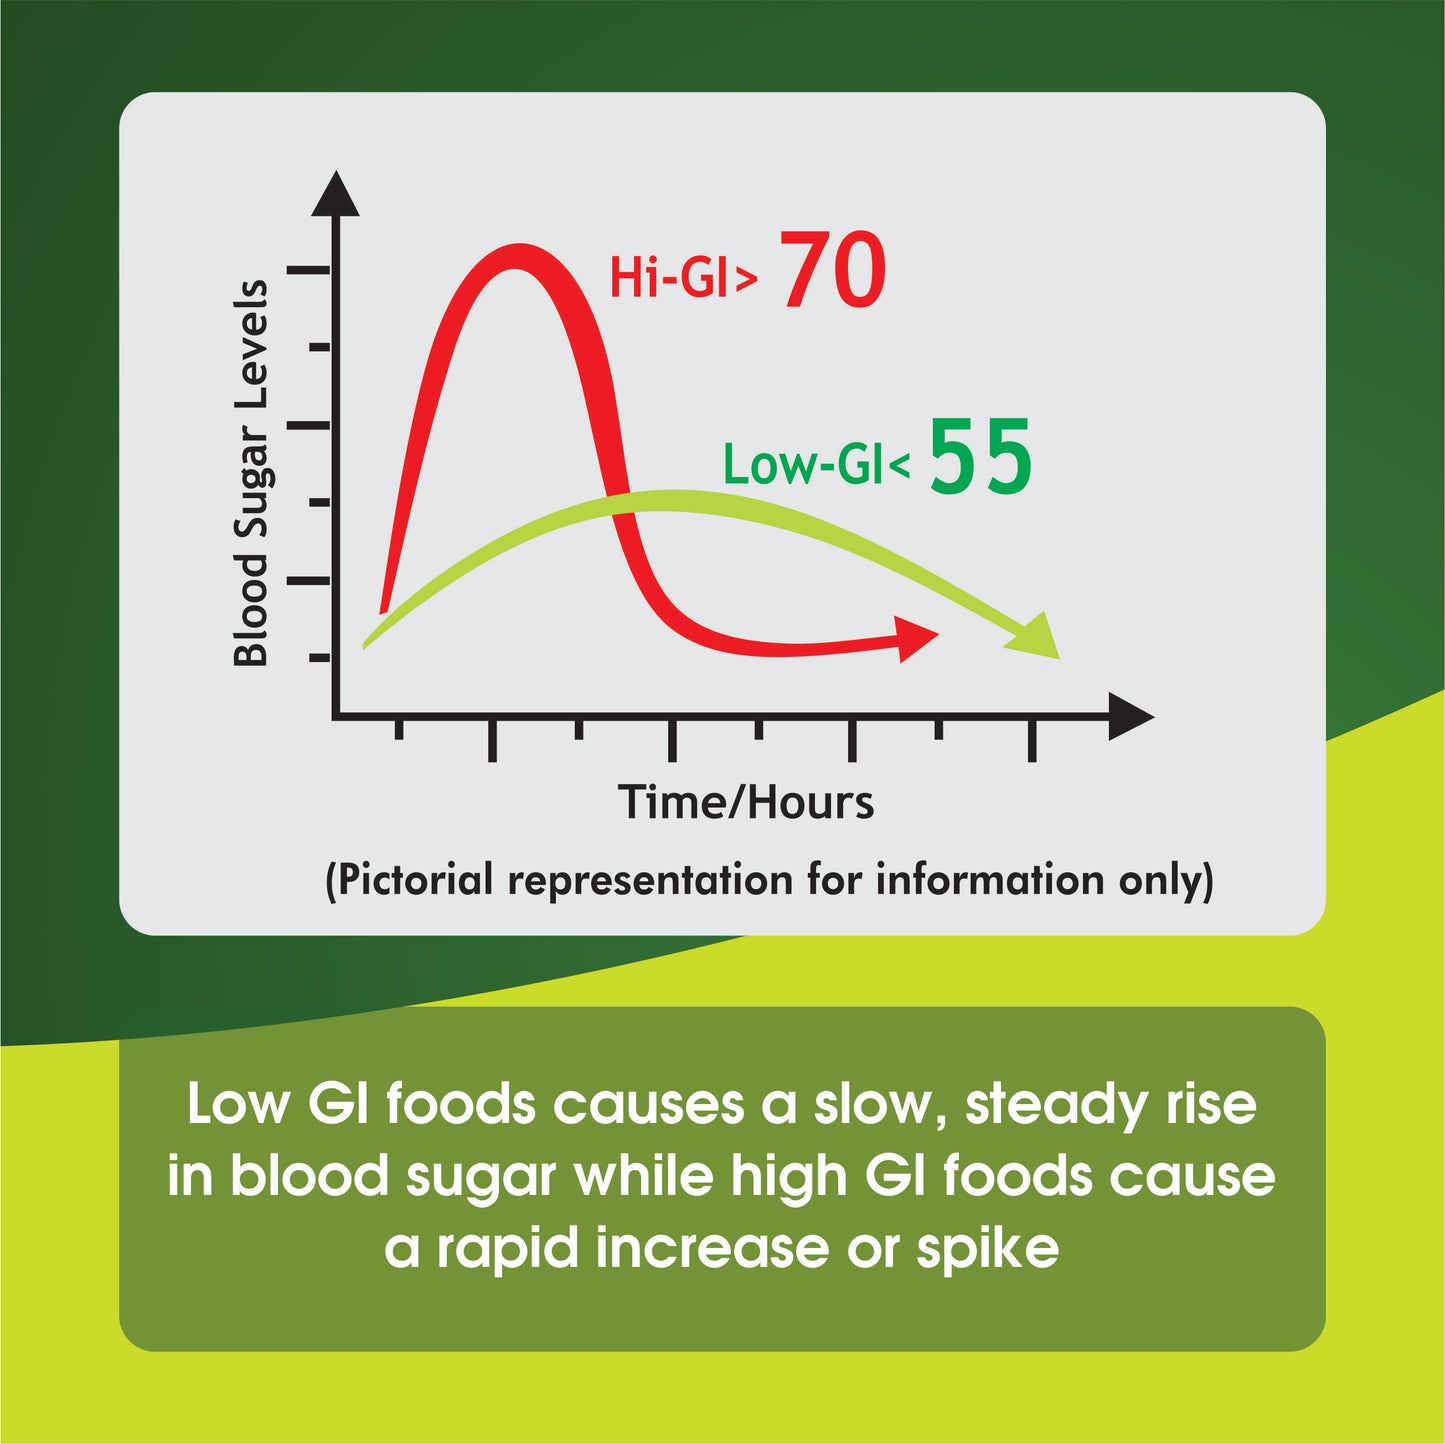 Low GI foods causes a slow, steady rise in blood sugar 